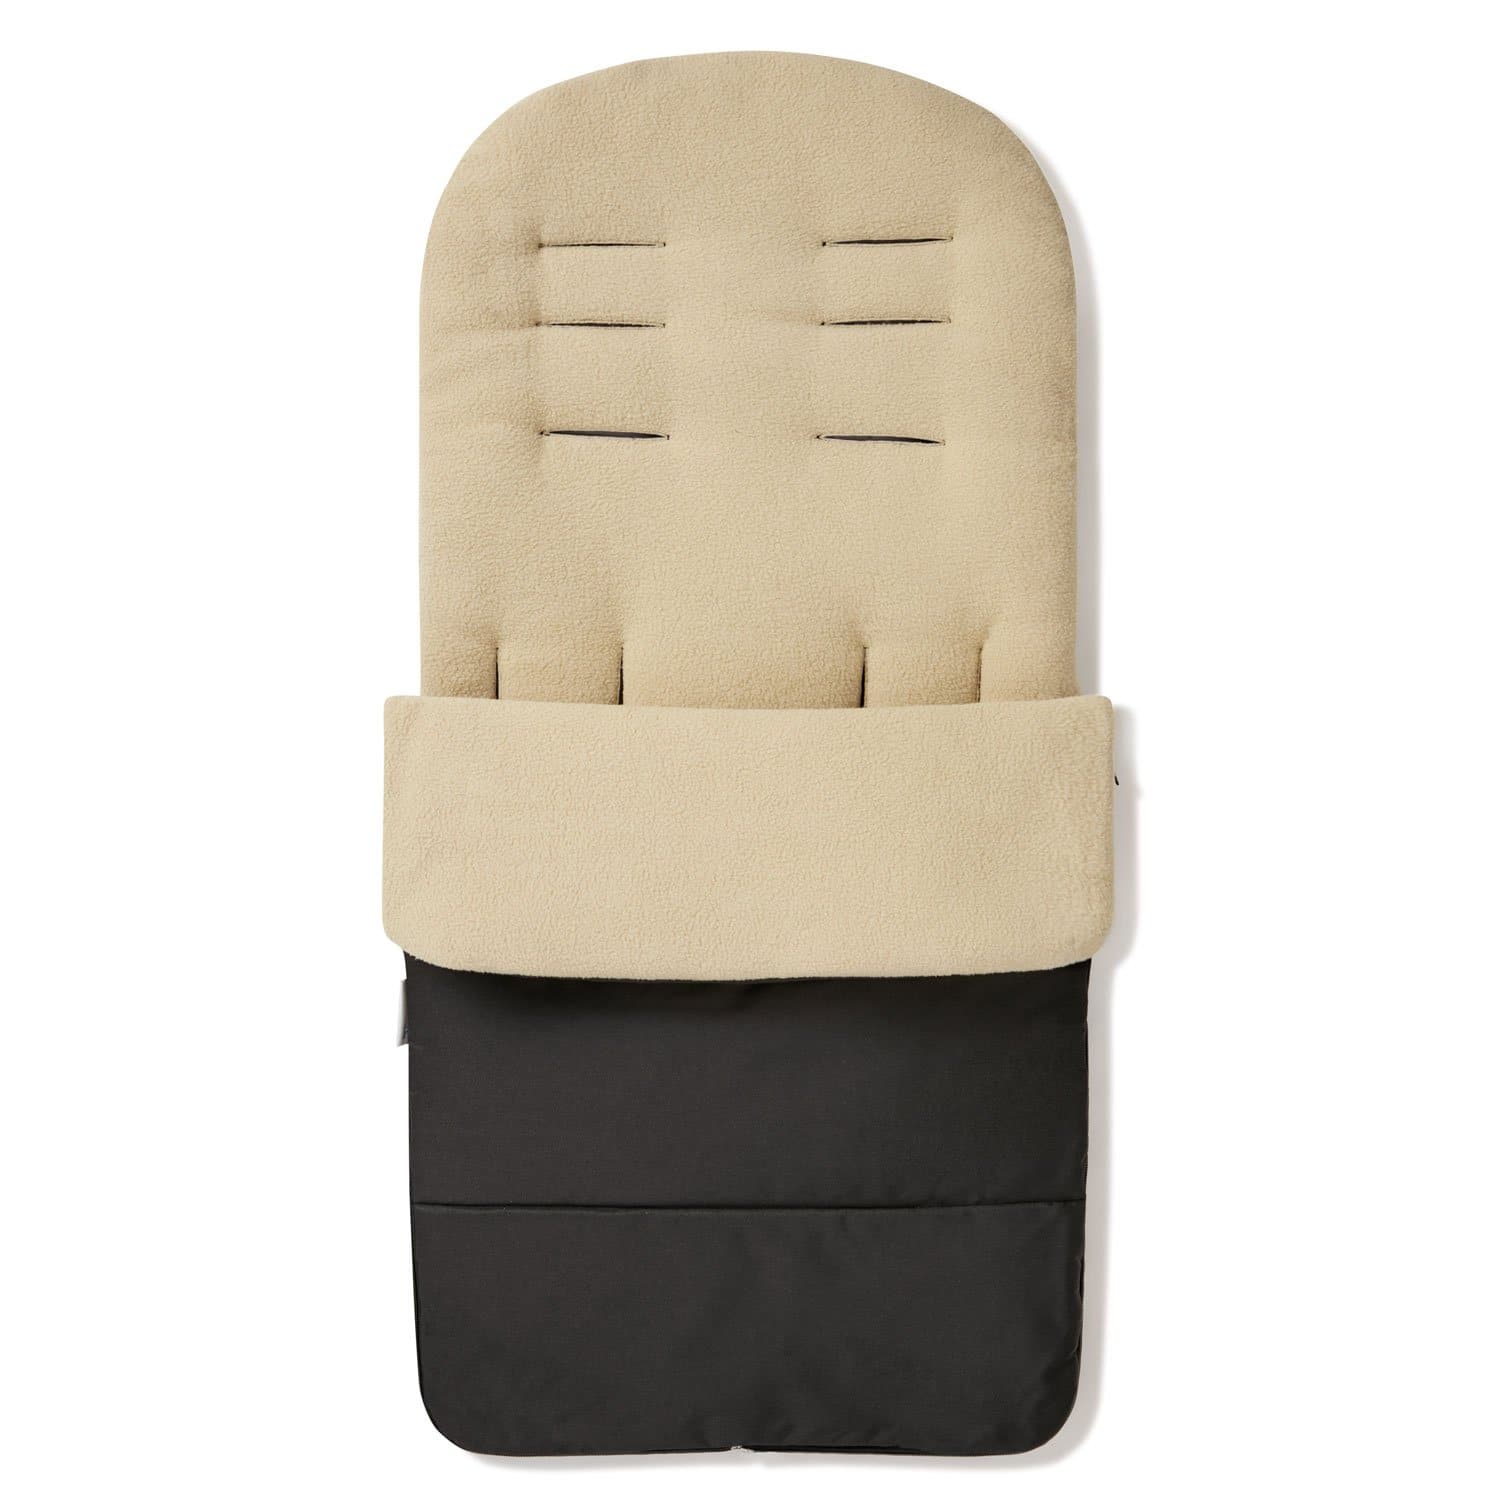 Premium Footmuff / Cosy Toes Compatible with Graco - Desert Sand / Fits All Models | For Your Little One